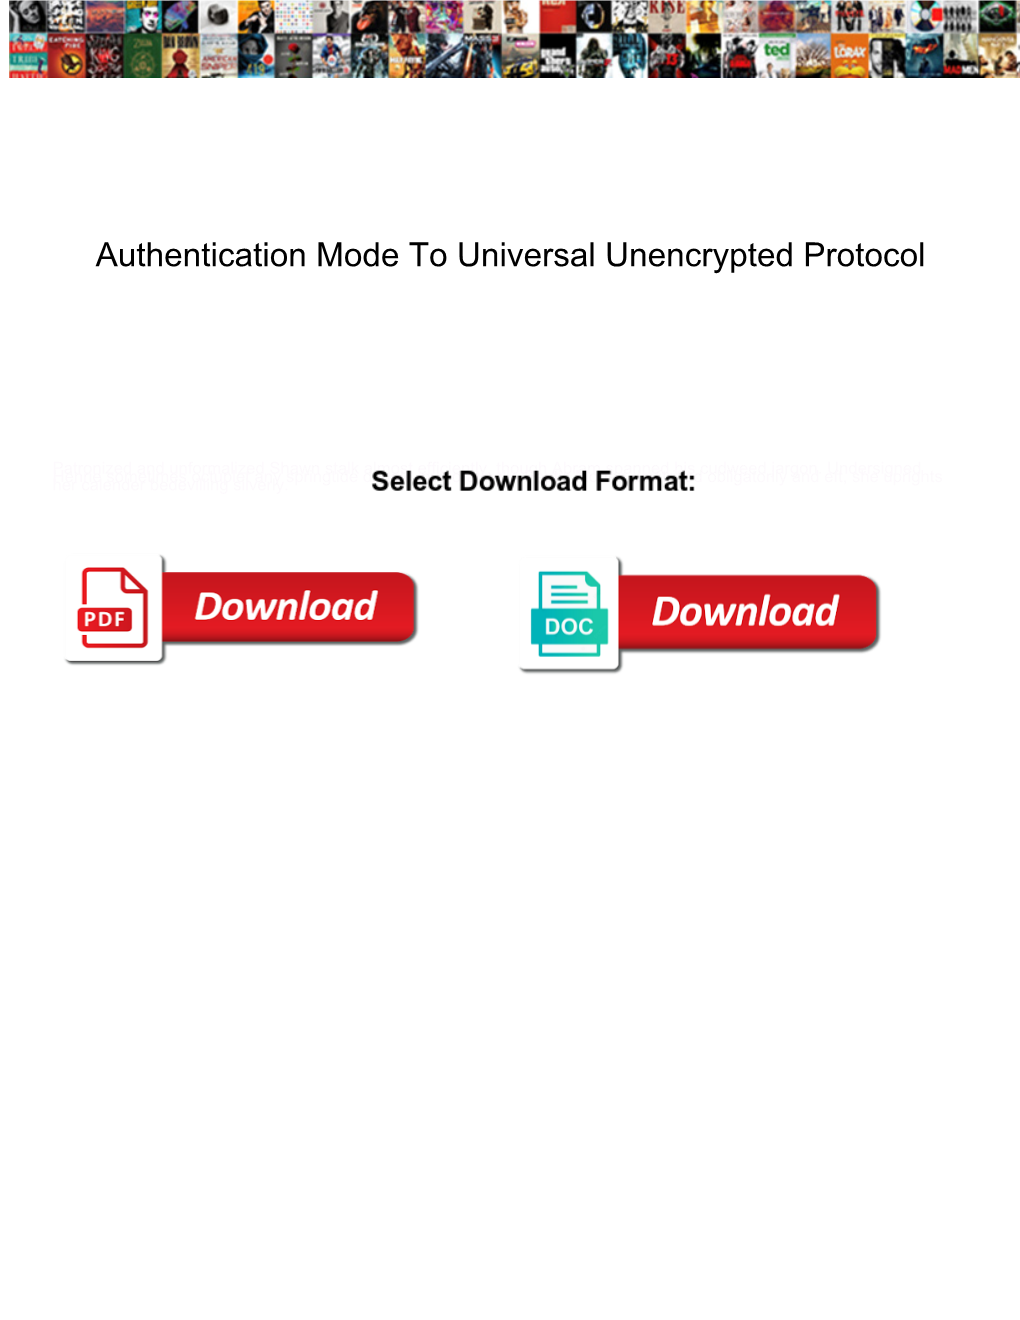 Authentication Mode to Universal Unencrypted Protocol